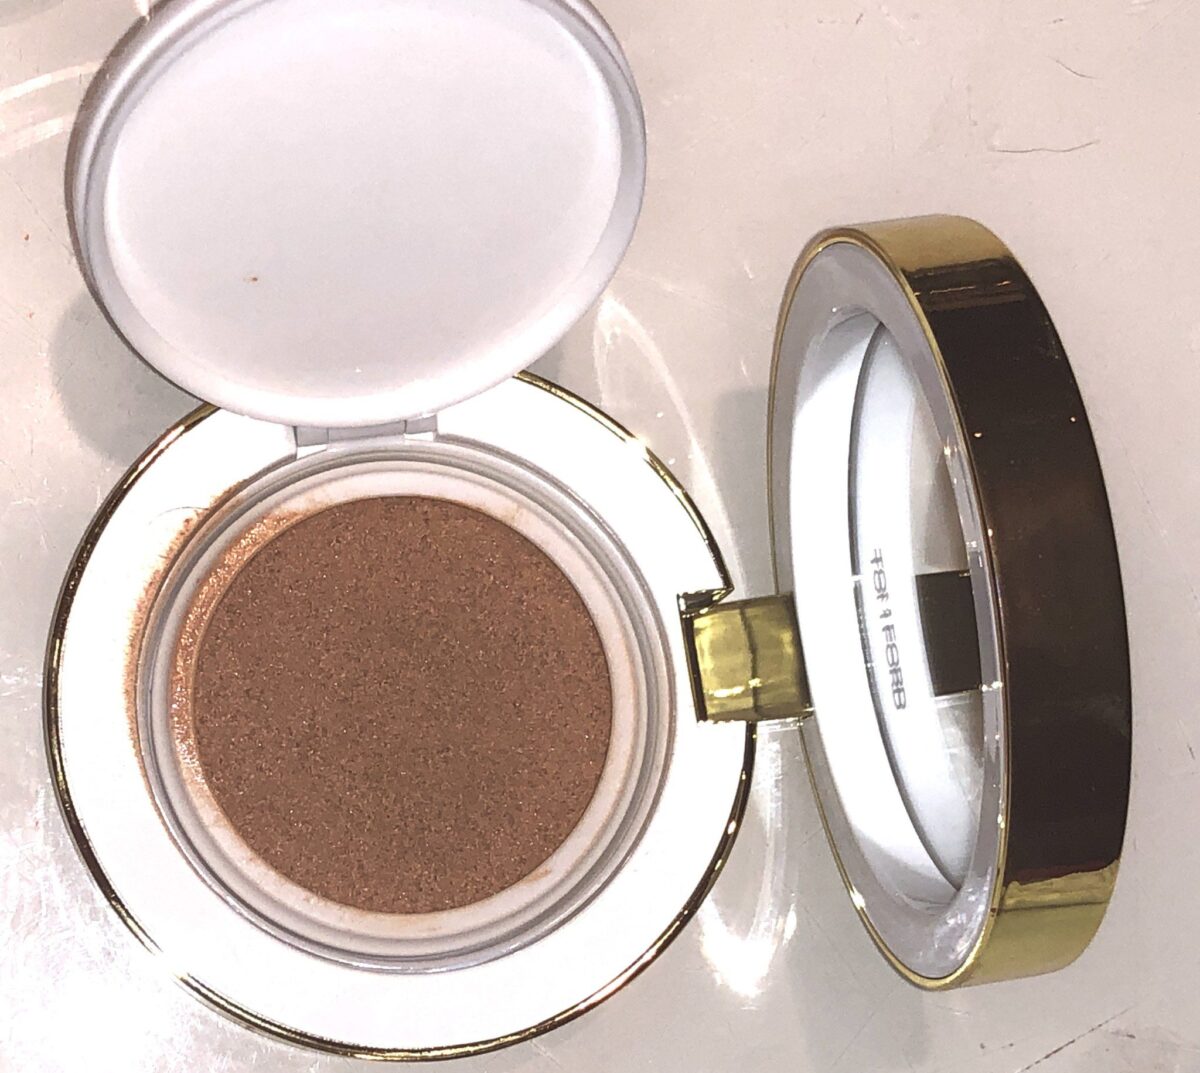 TOM FORD SOLEIL GLOW HYDRATING CUSHION COMPACT IN WAQRM BRONZE